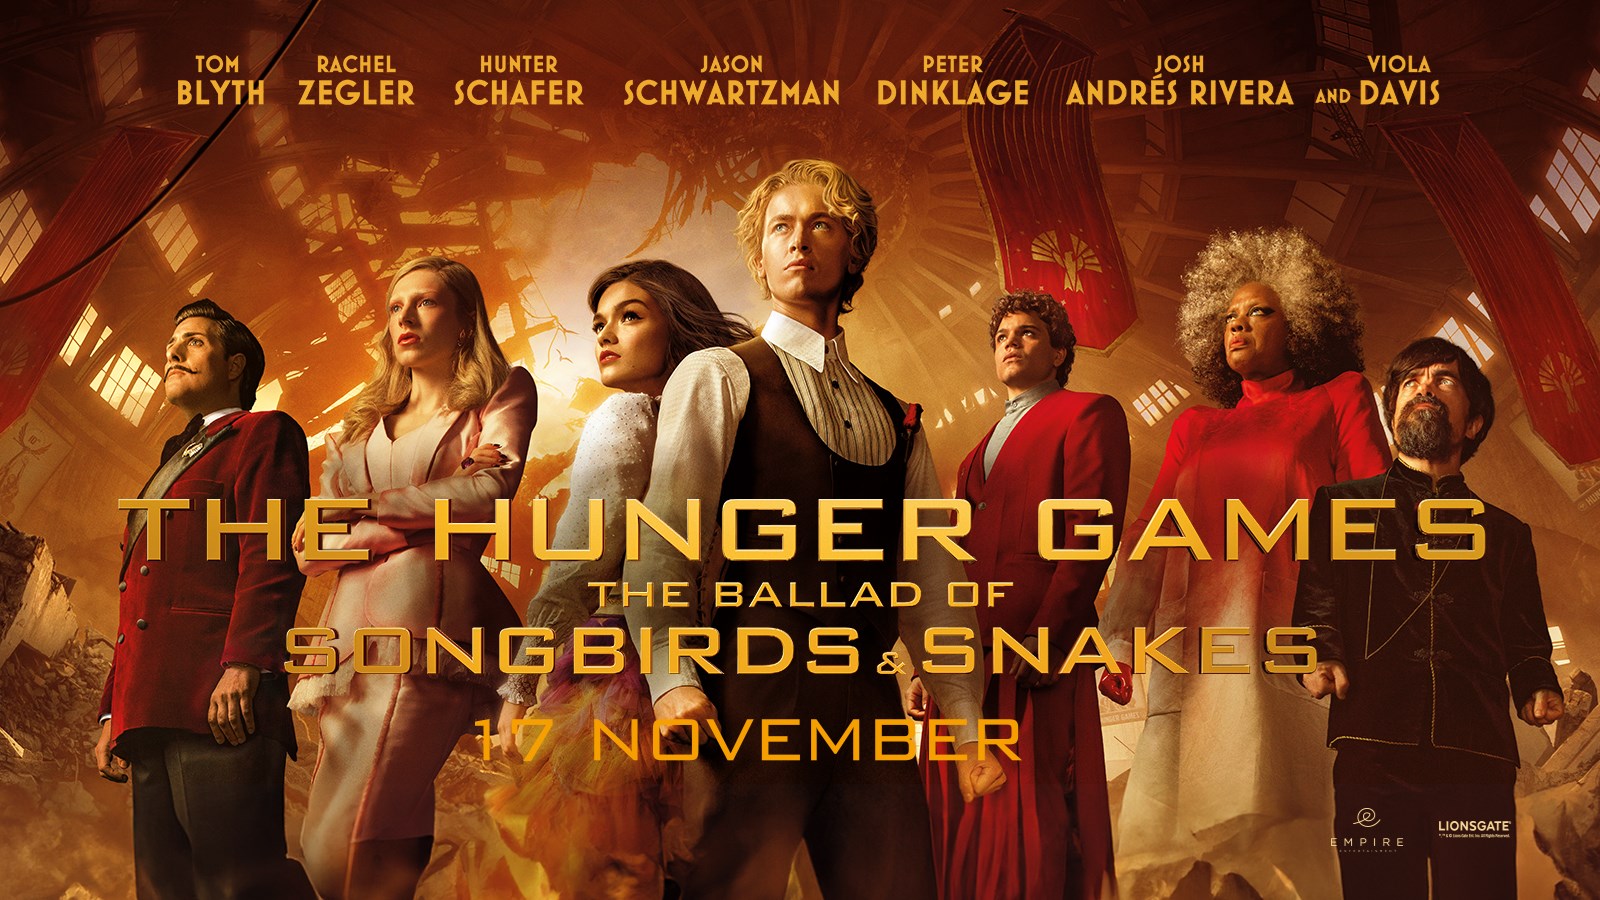 HUNGER GAMES: BALLAD OF SONGBIRDS AND SNAKES